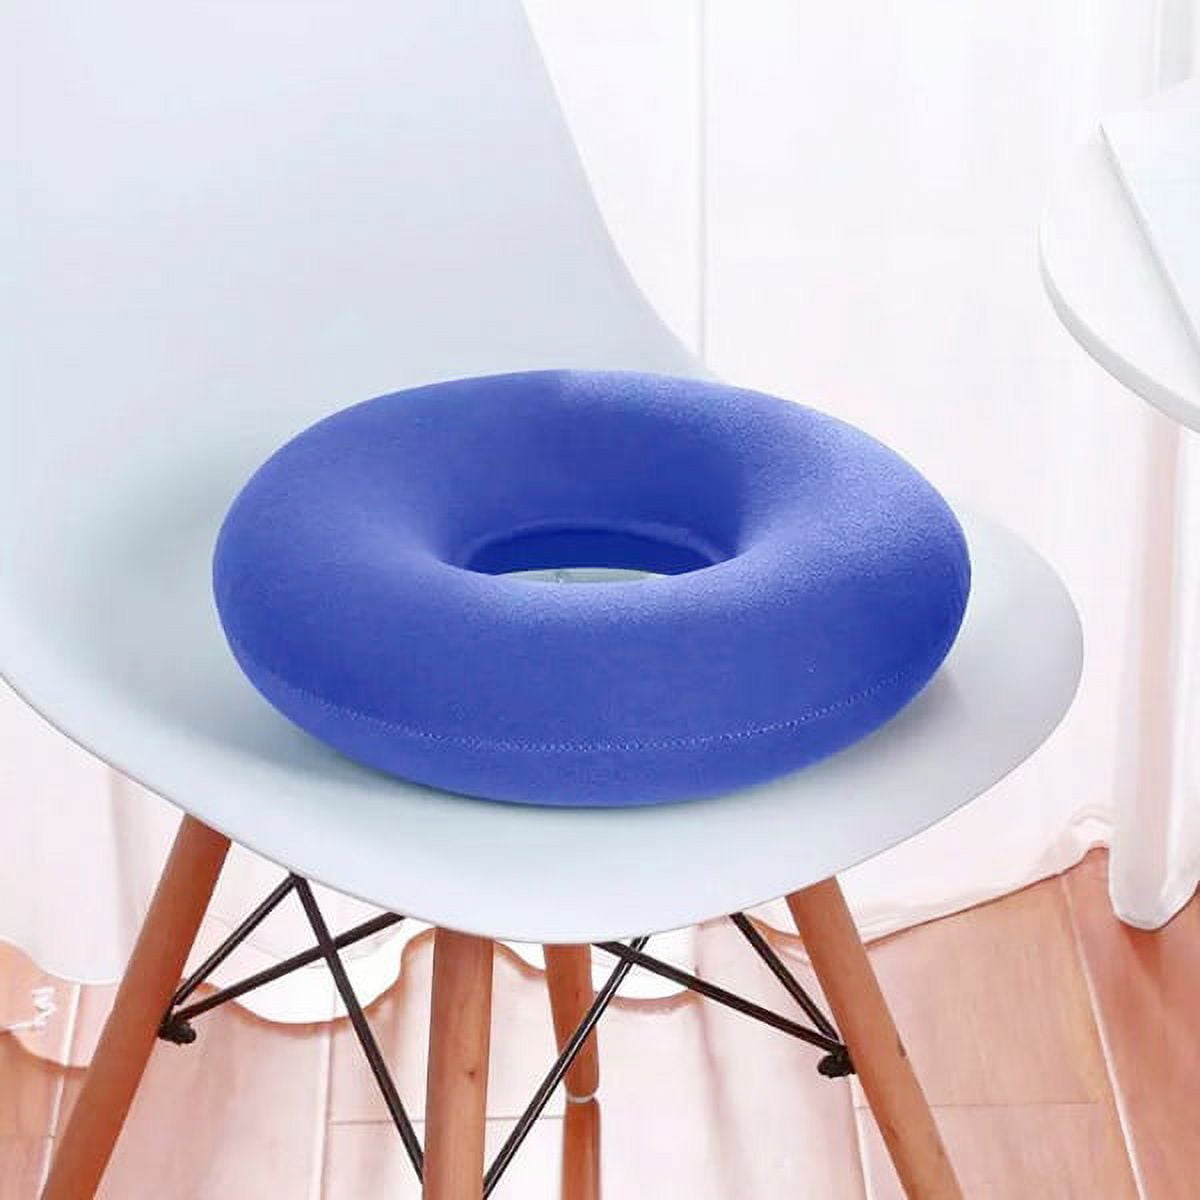 Premium Donut Cushion - Portable Inflatable Seat Pillow for Hemorrhoid –  Mars Med Supply